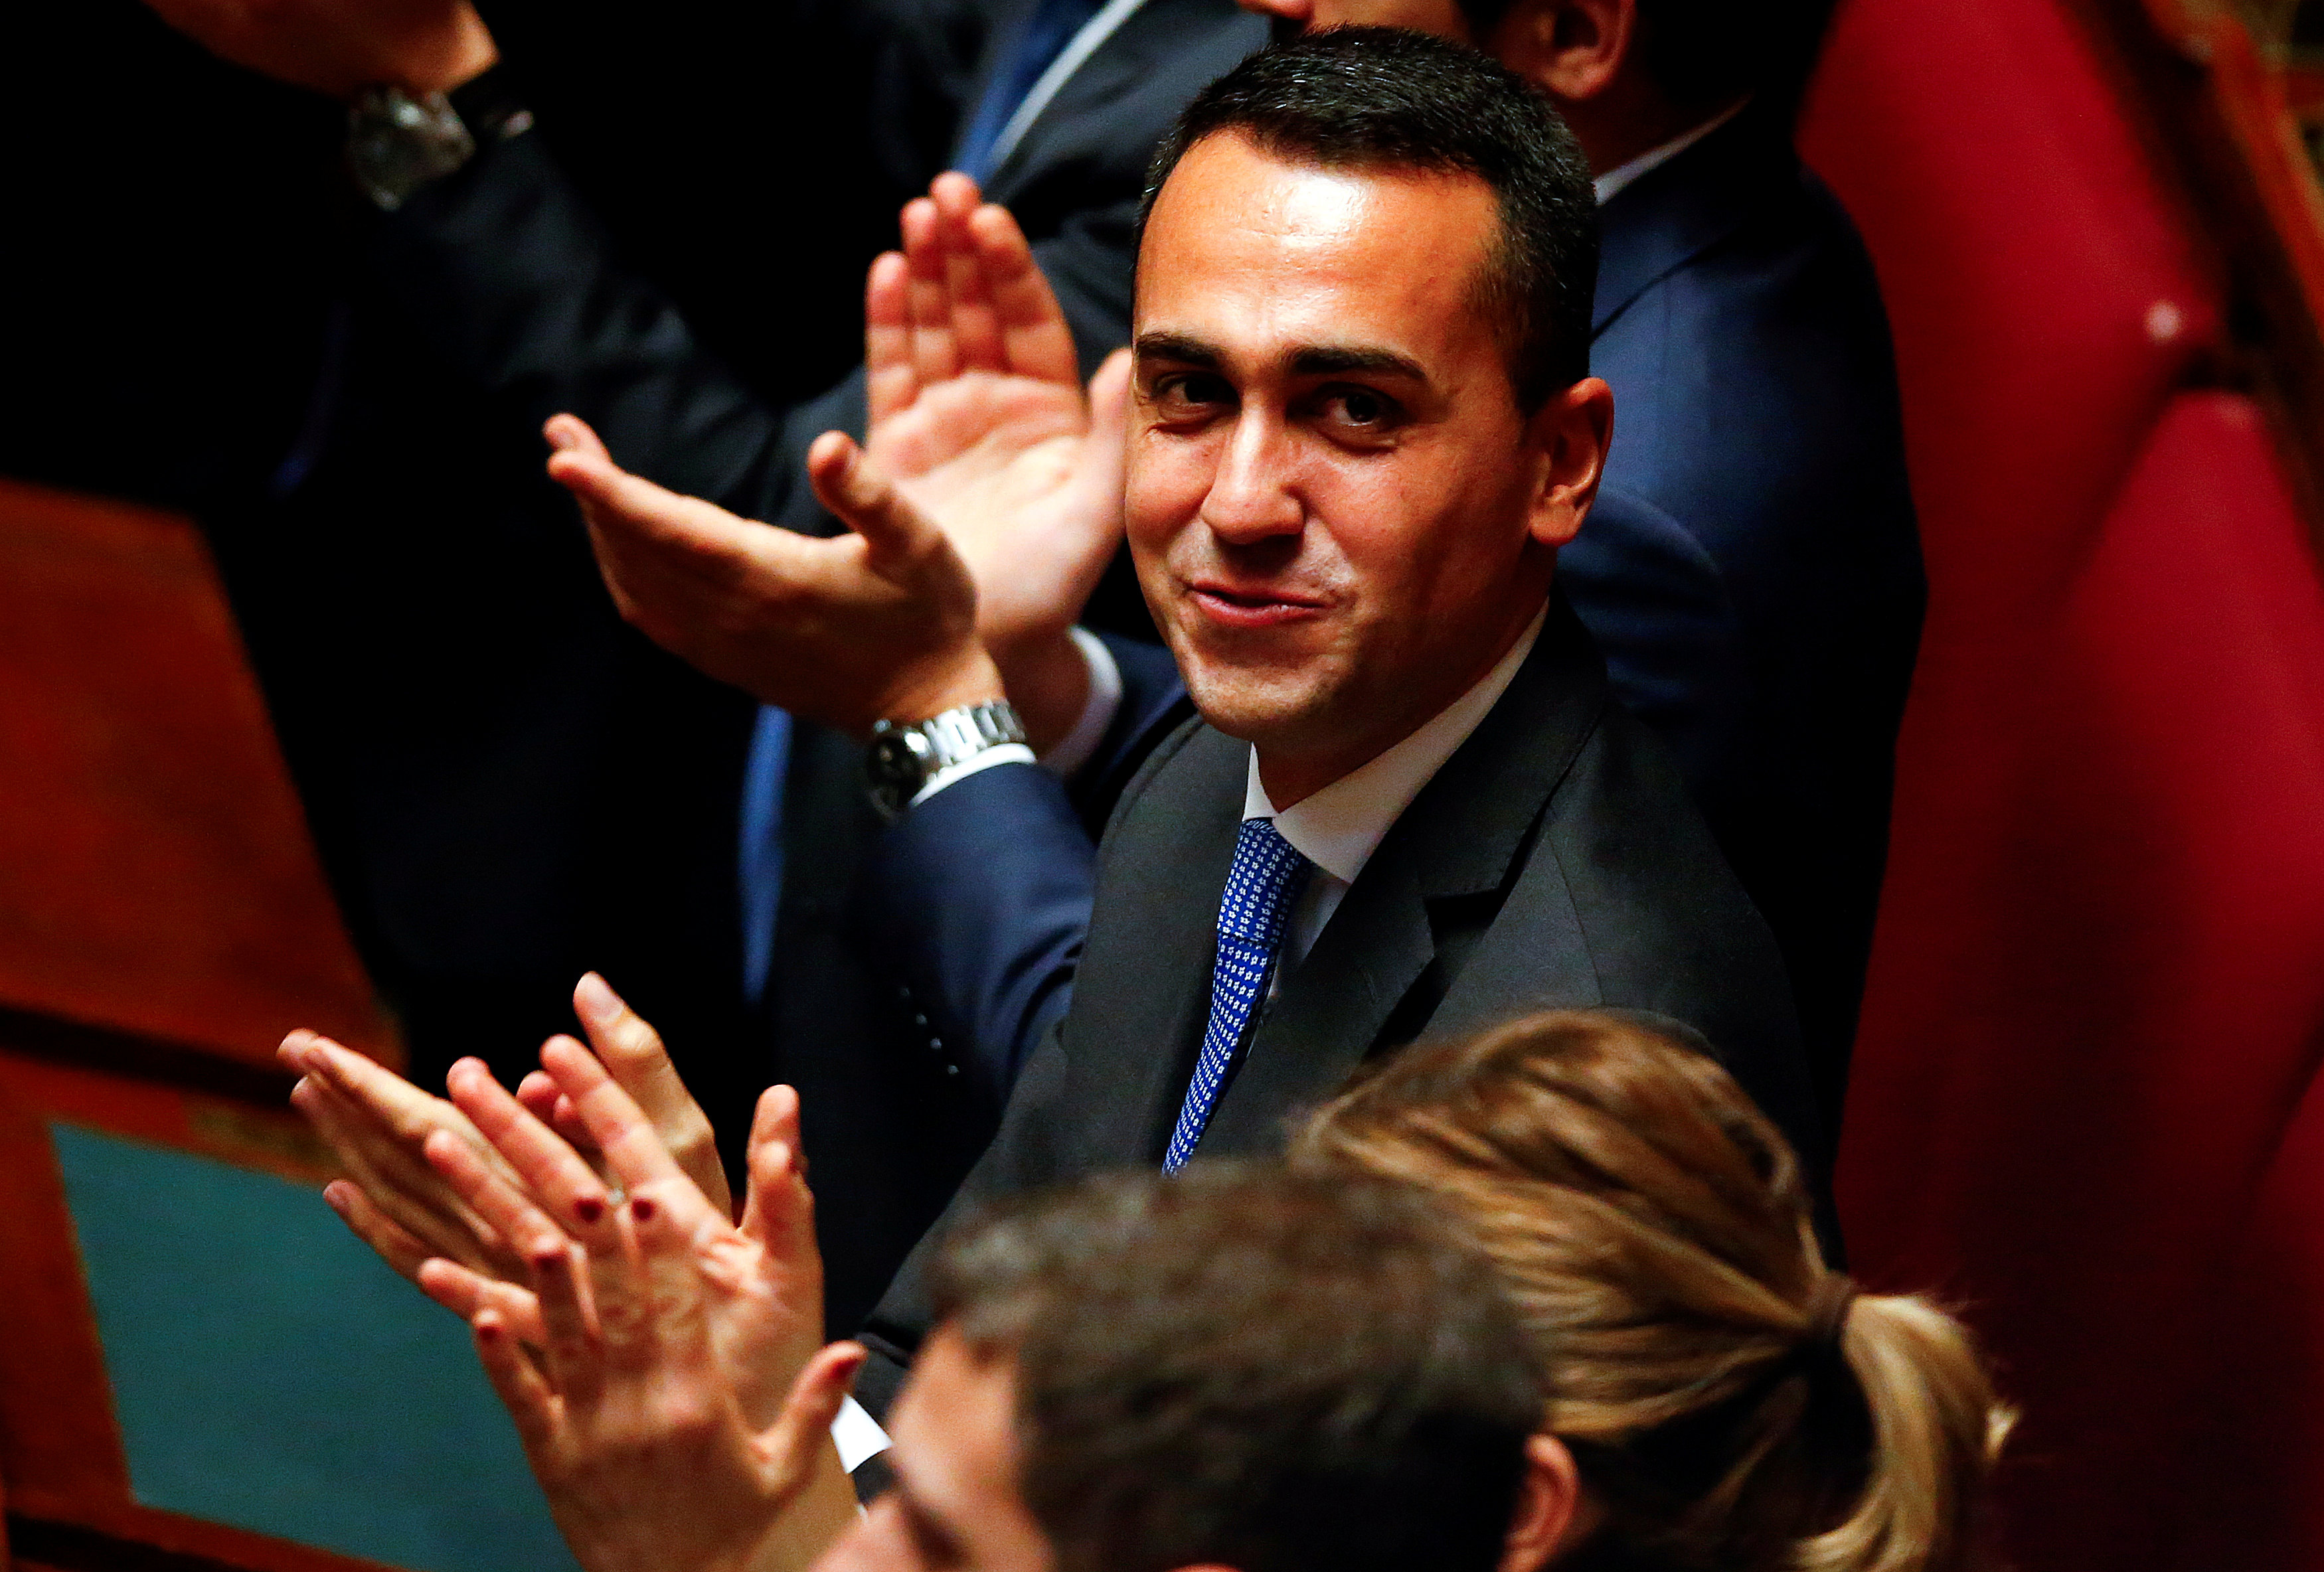 Italy's 5-Star head praises League leader after speaker deal